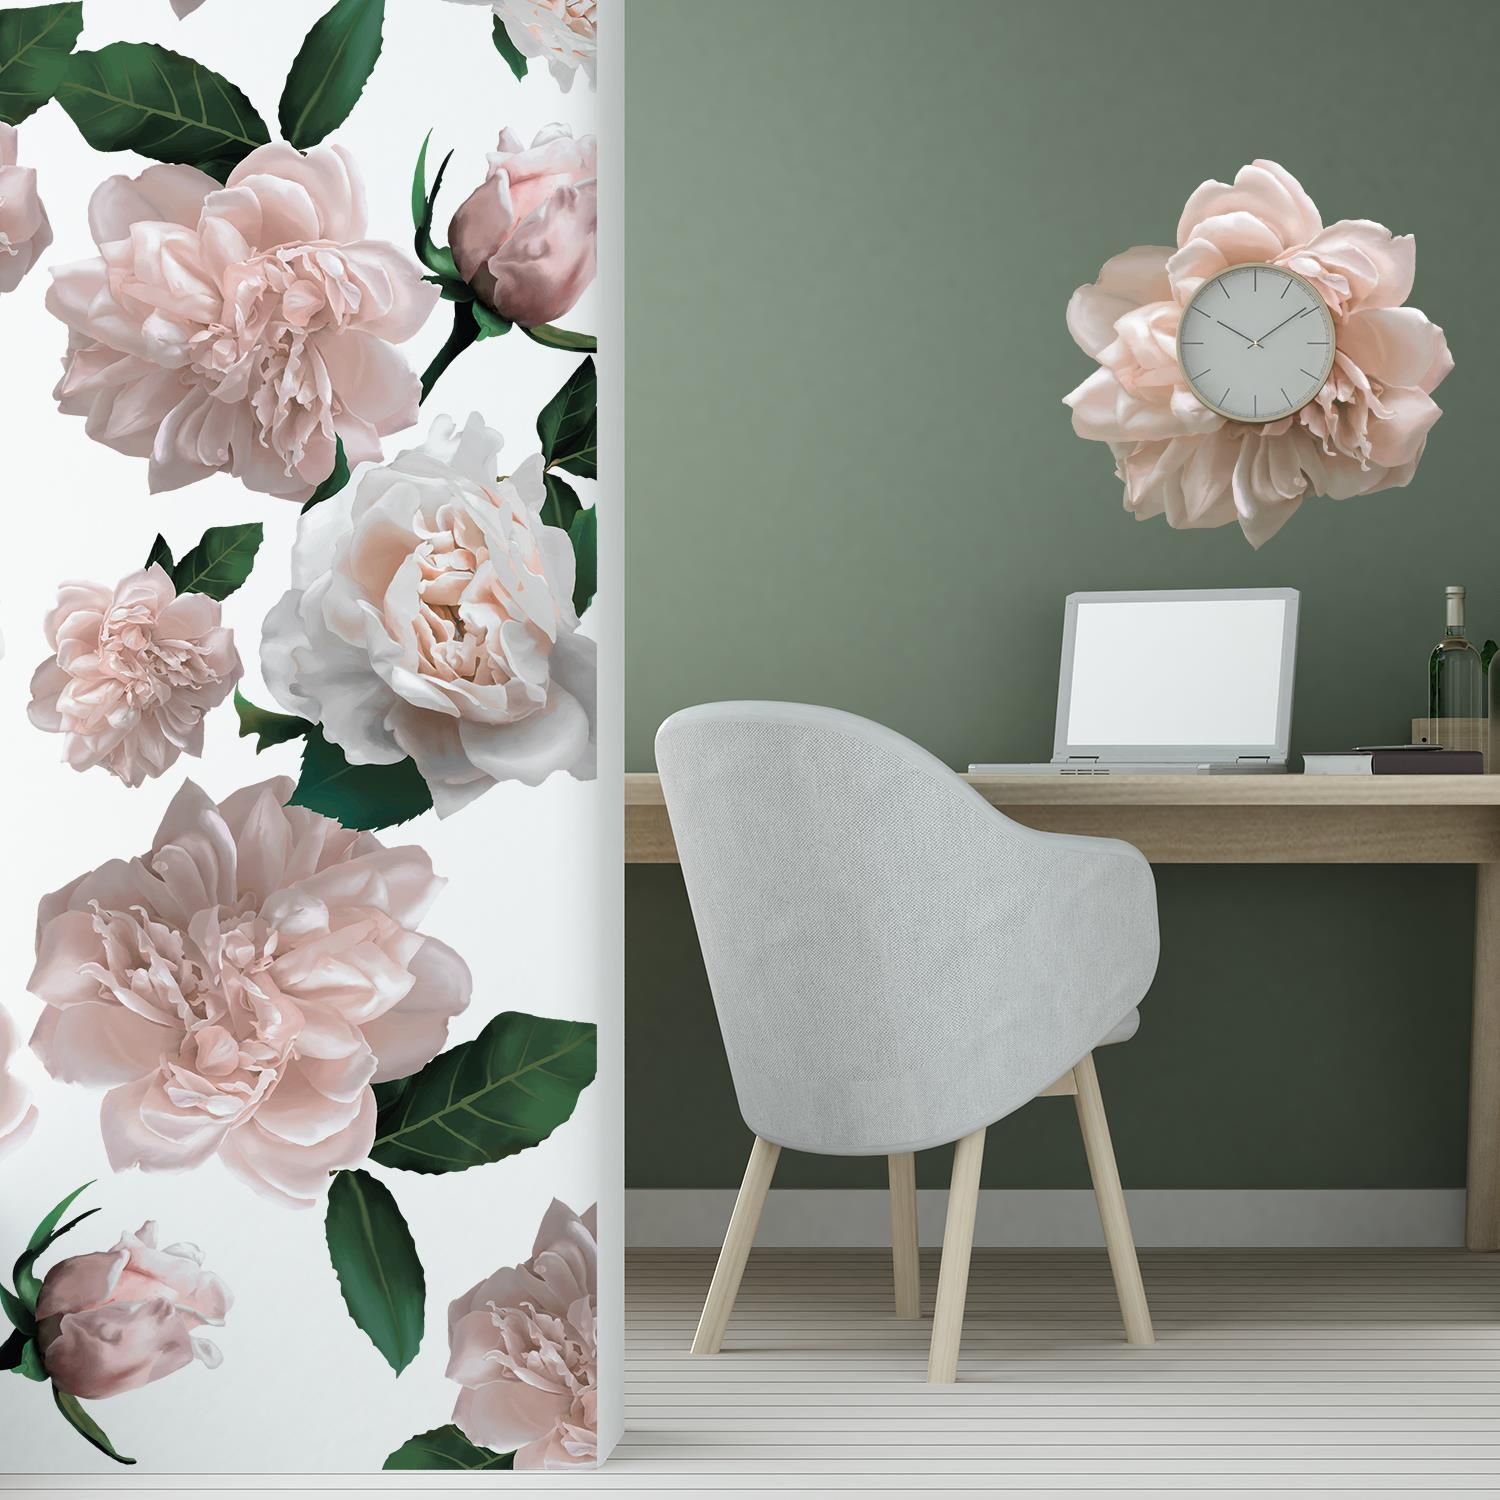 - Add glamour and a warm touch to your rooms with our Oversized Classic Roses stickers set! 
- This product is easy to apply and easily removable using hair dryer. 
- If applied on wallpaper the sticker will NOT be REMOVABLE.Can be applied on laminated surfaces. 
- Please note that every effort is made to the illustration of our items accurately, however the colour may differ slightly when the product is applied on the mirror (due to the sunlight) and wall colour surfaces but might cause damage when removed. 
- The package contains 1 sheet of 60 x 90 cm containing 12 stickers.